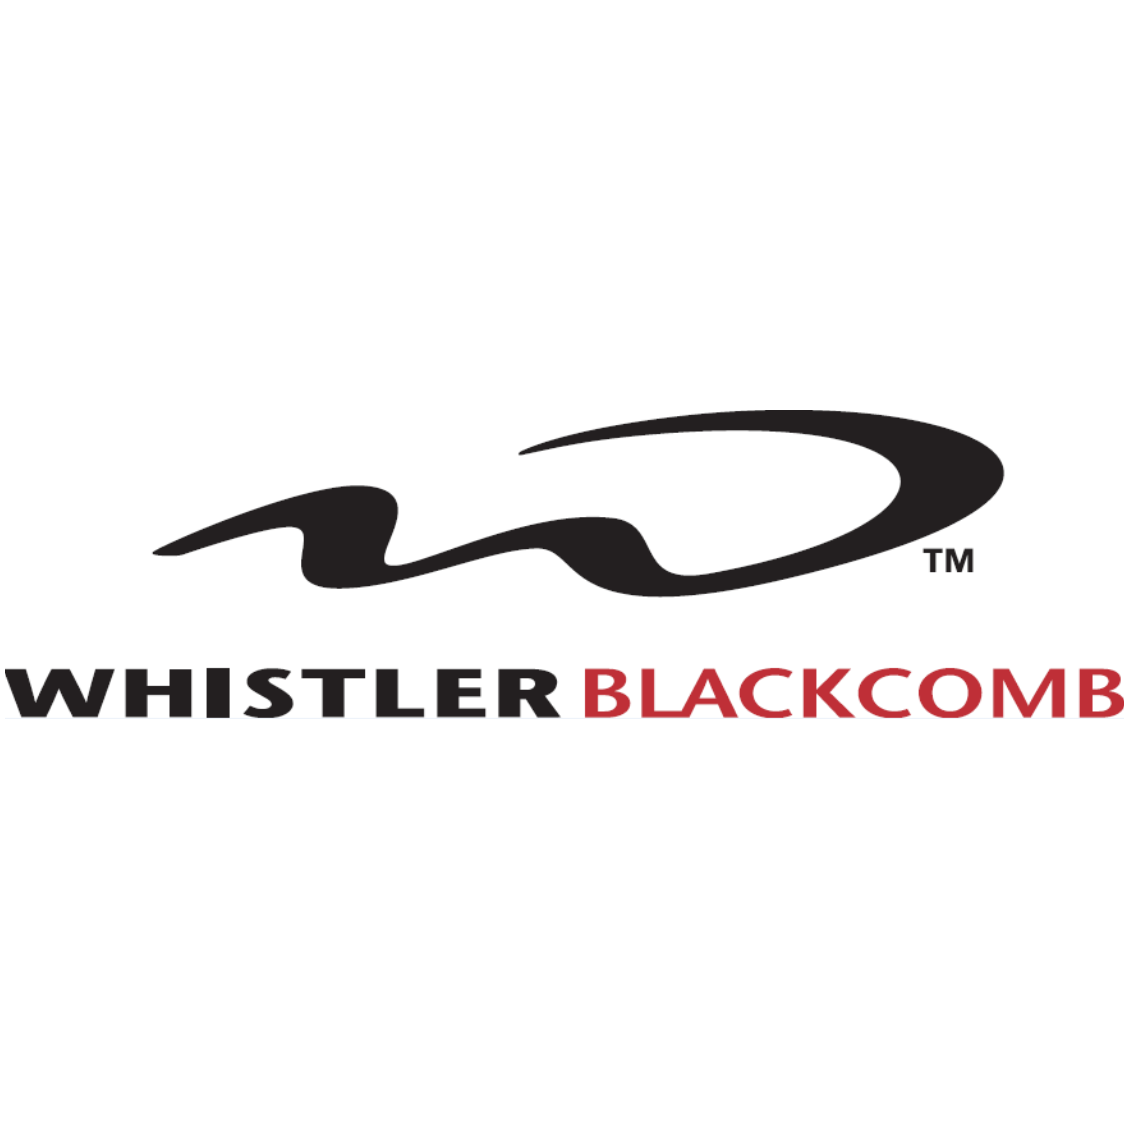 Official Twitter of Whistler Blackcomb Recruiting, jobs, jobs, jobs! Come work at the top ski and snowboard resort in the world!